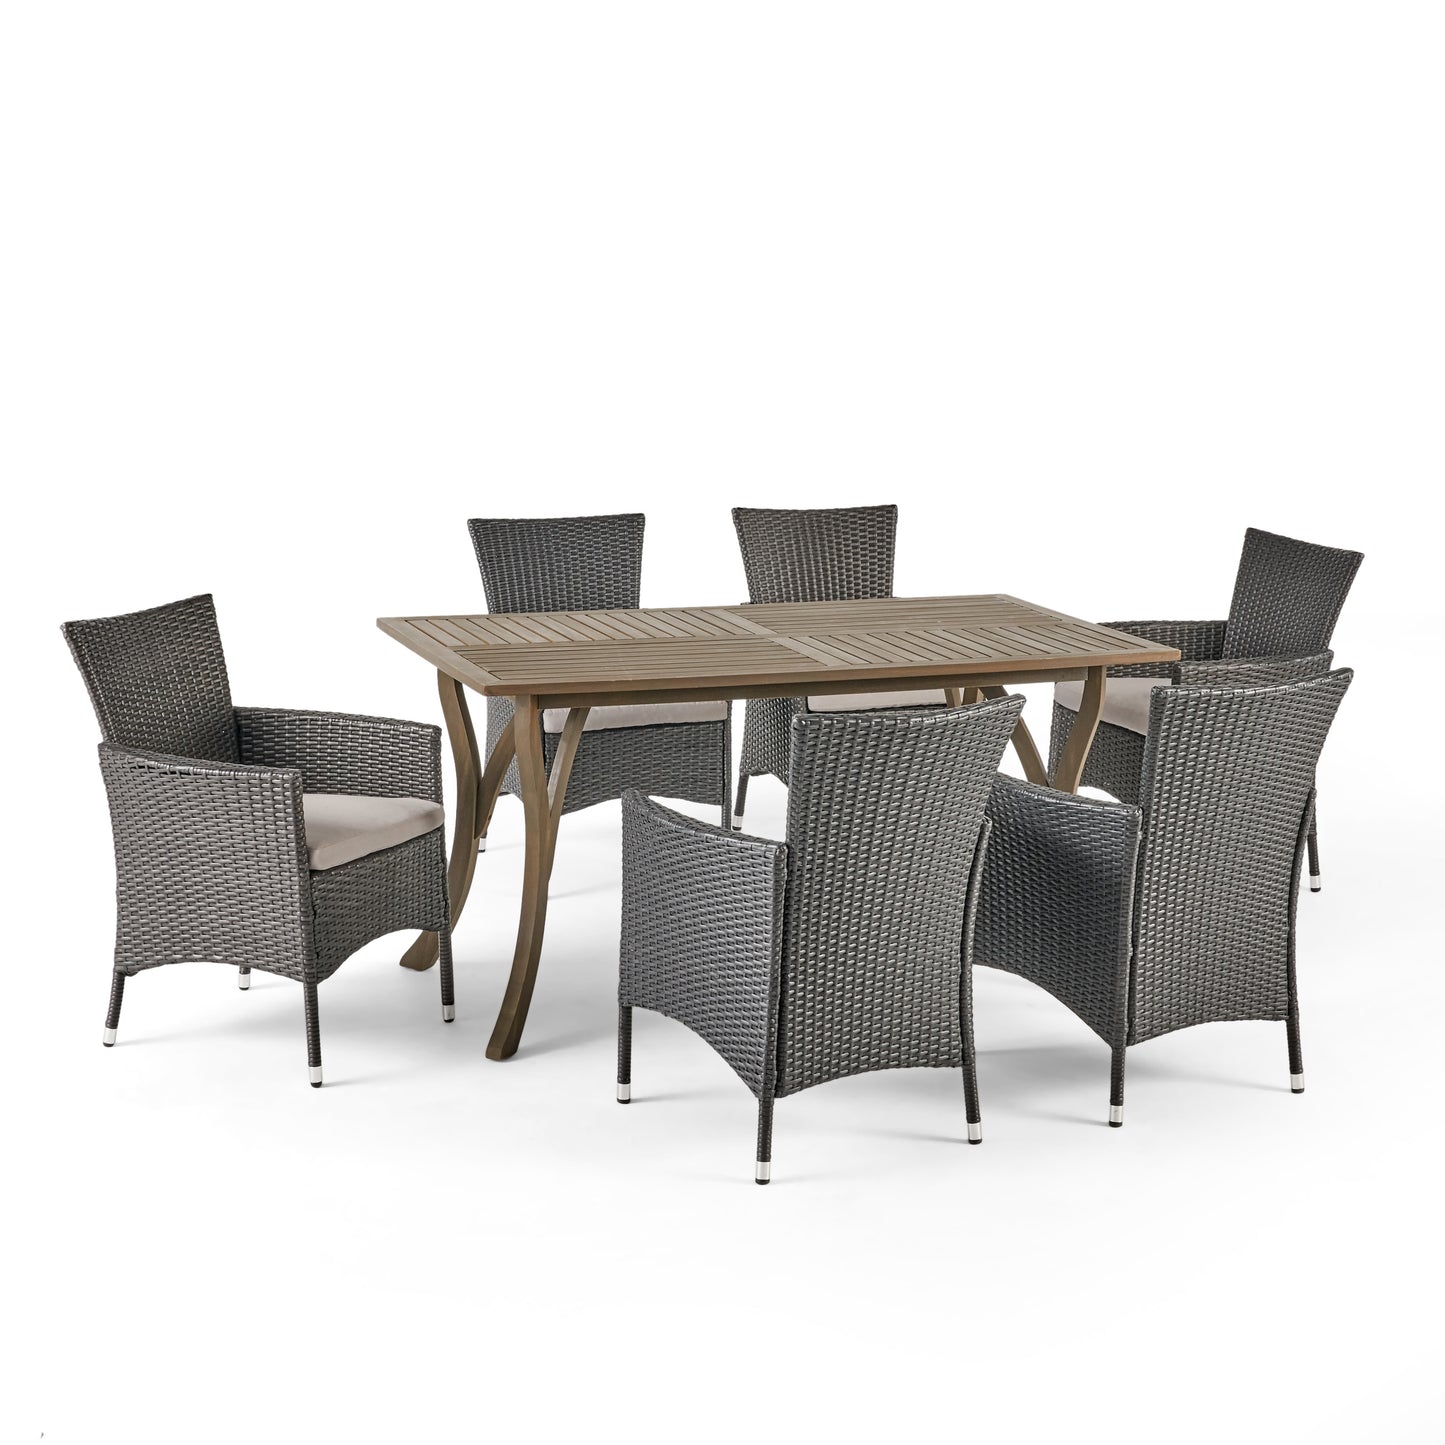 Karly Outdoor 7 Piece Wood and Wicker Dining Set